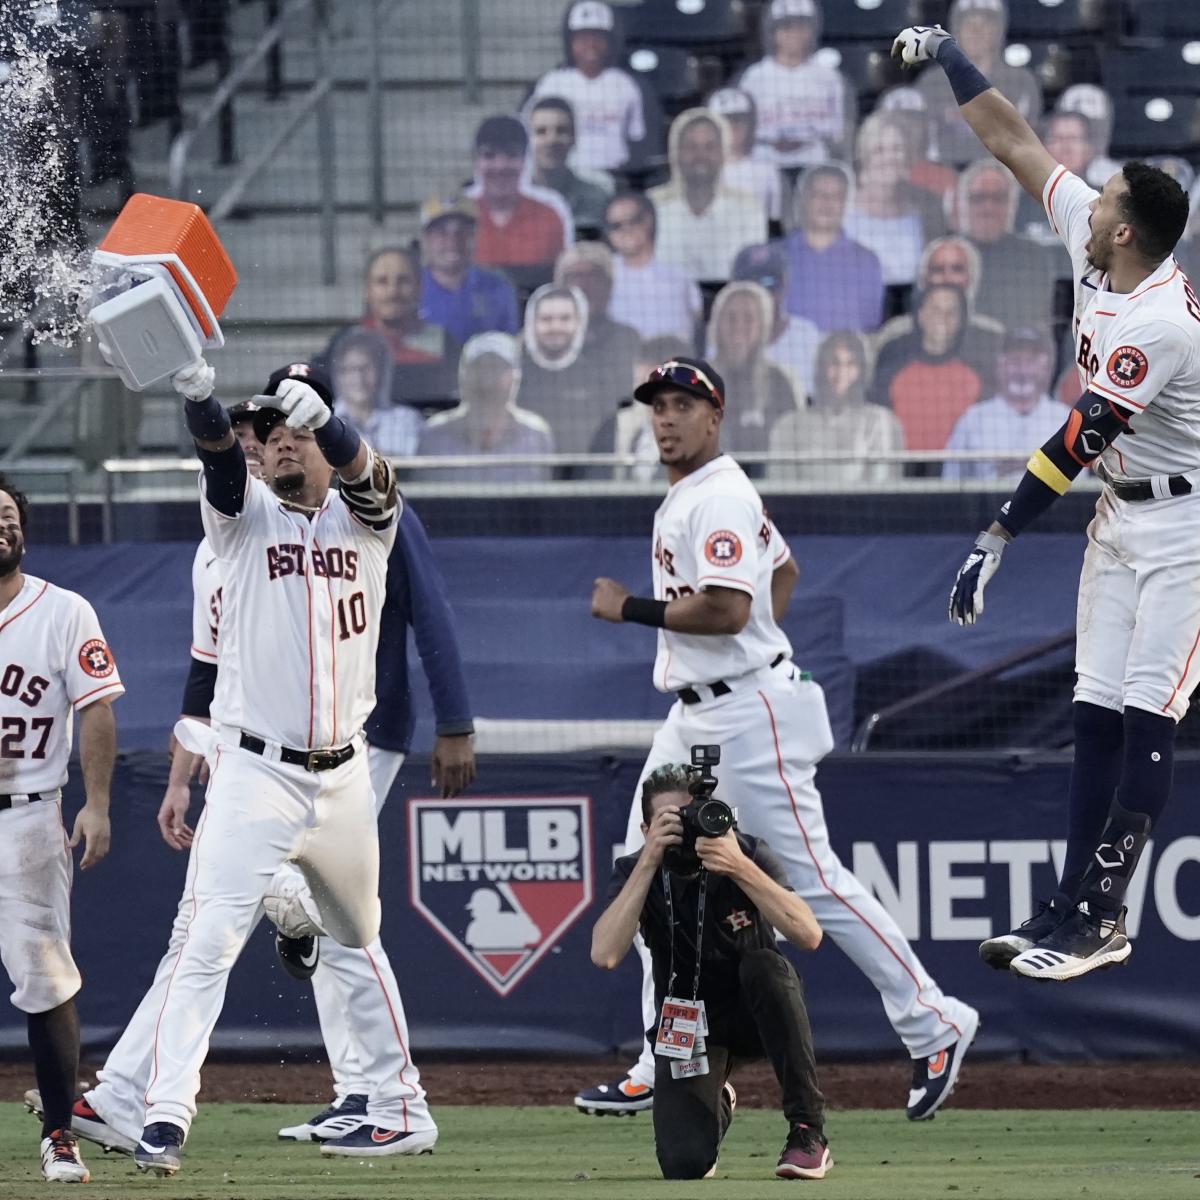 Astros vs. Rays ALCS Game 6 Time, TV Info, Live Stream and More News